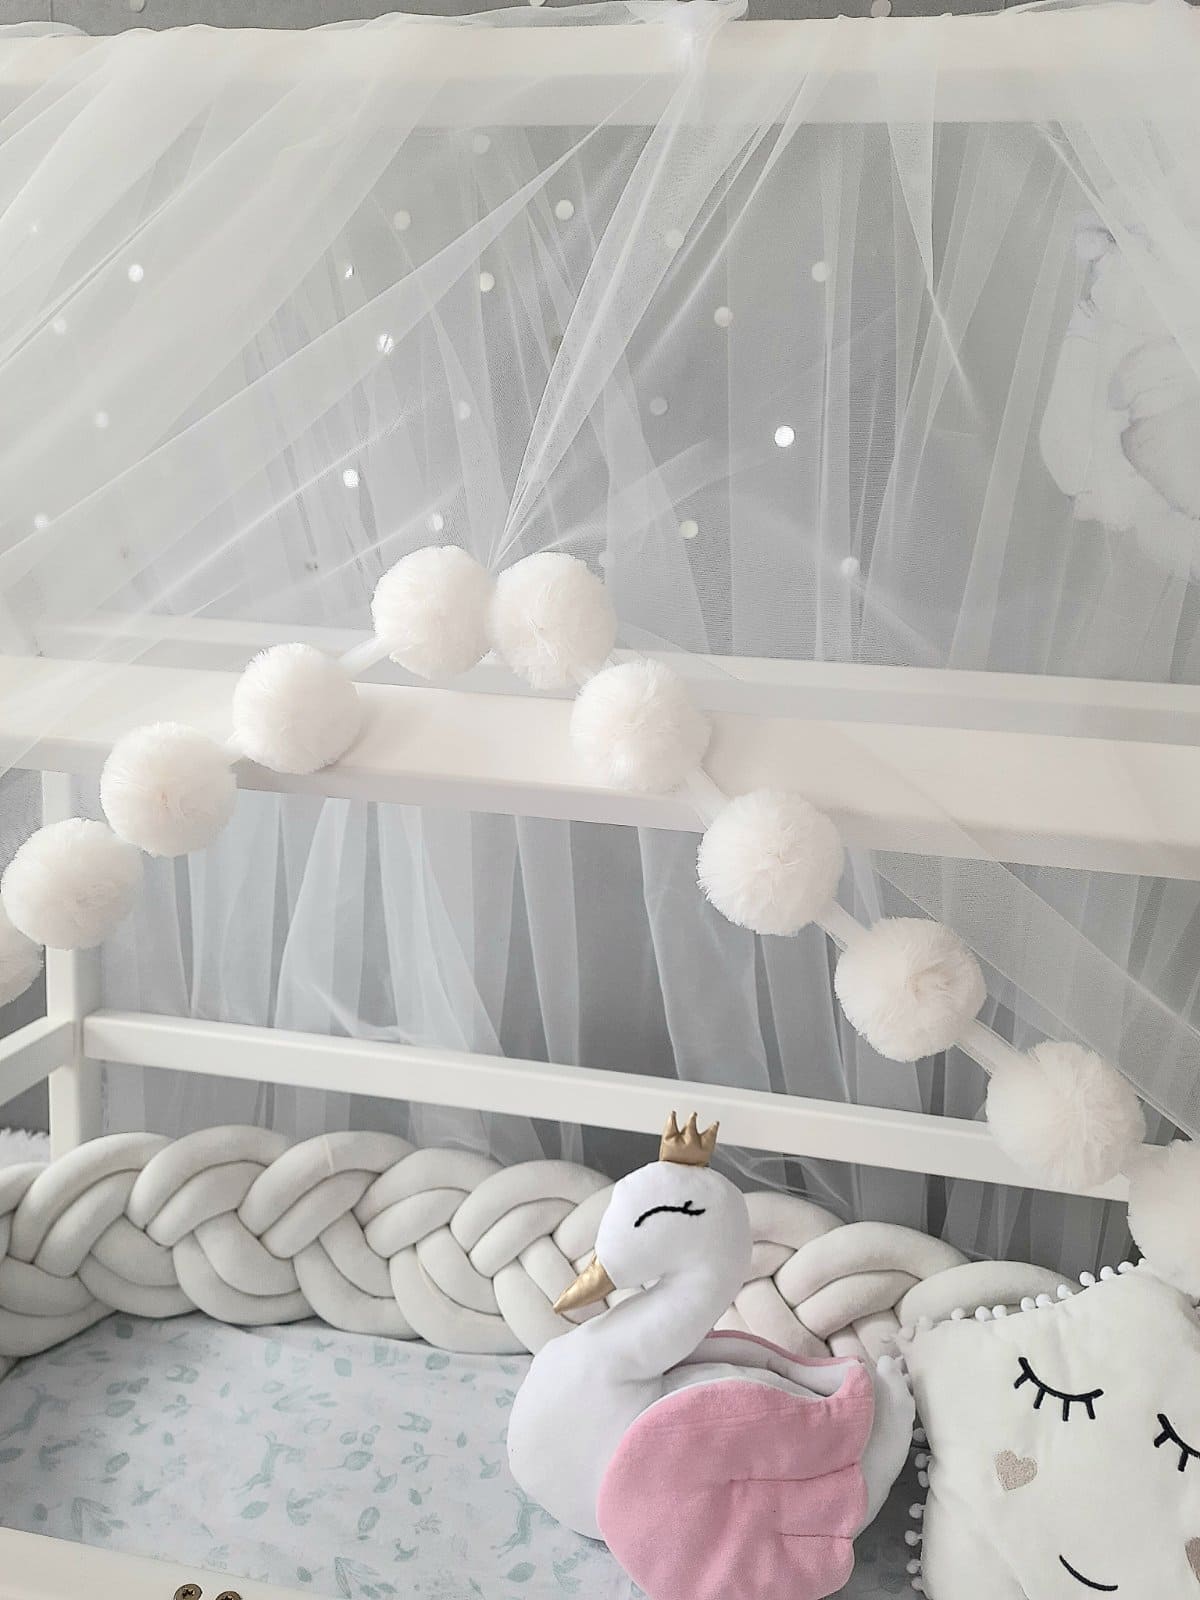 White Montessori Canopy with Pom Poms for nursery. Inside Montessori bed white swan pillow, star pillow and Double braided crib bumper. Close-up slight right view of the front side